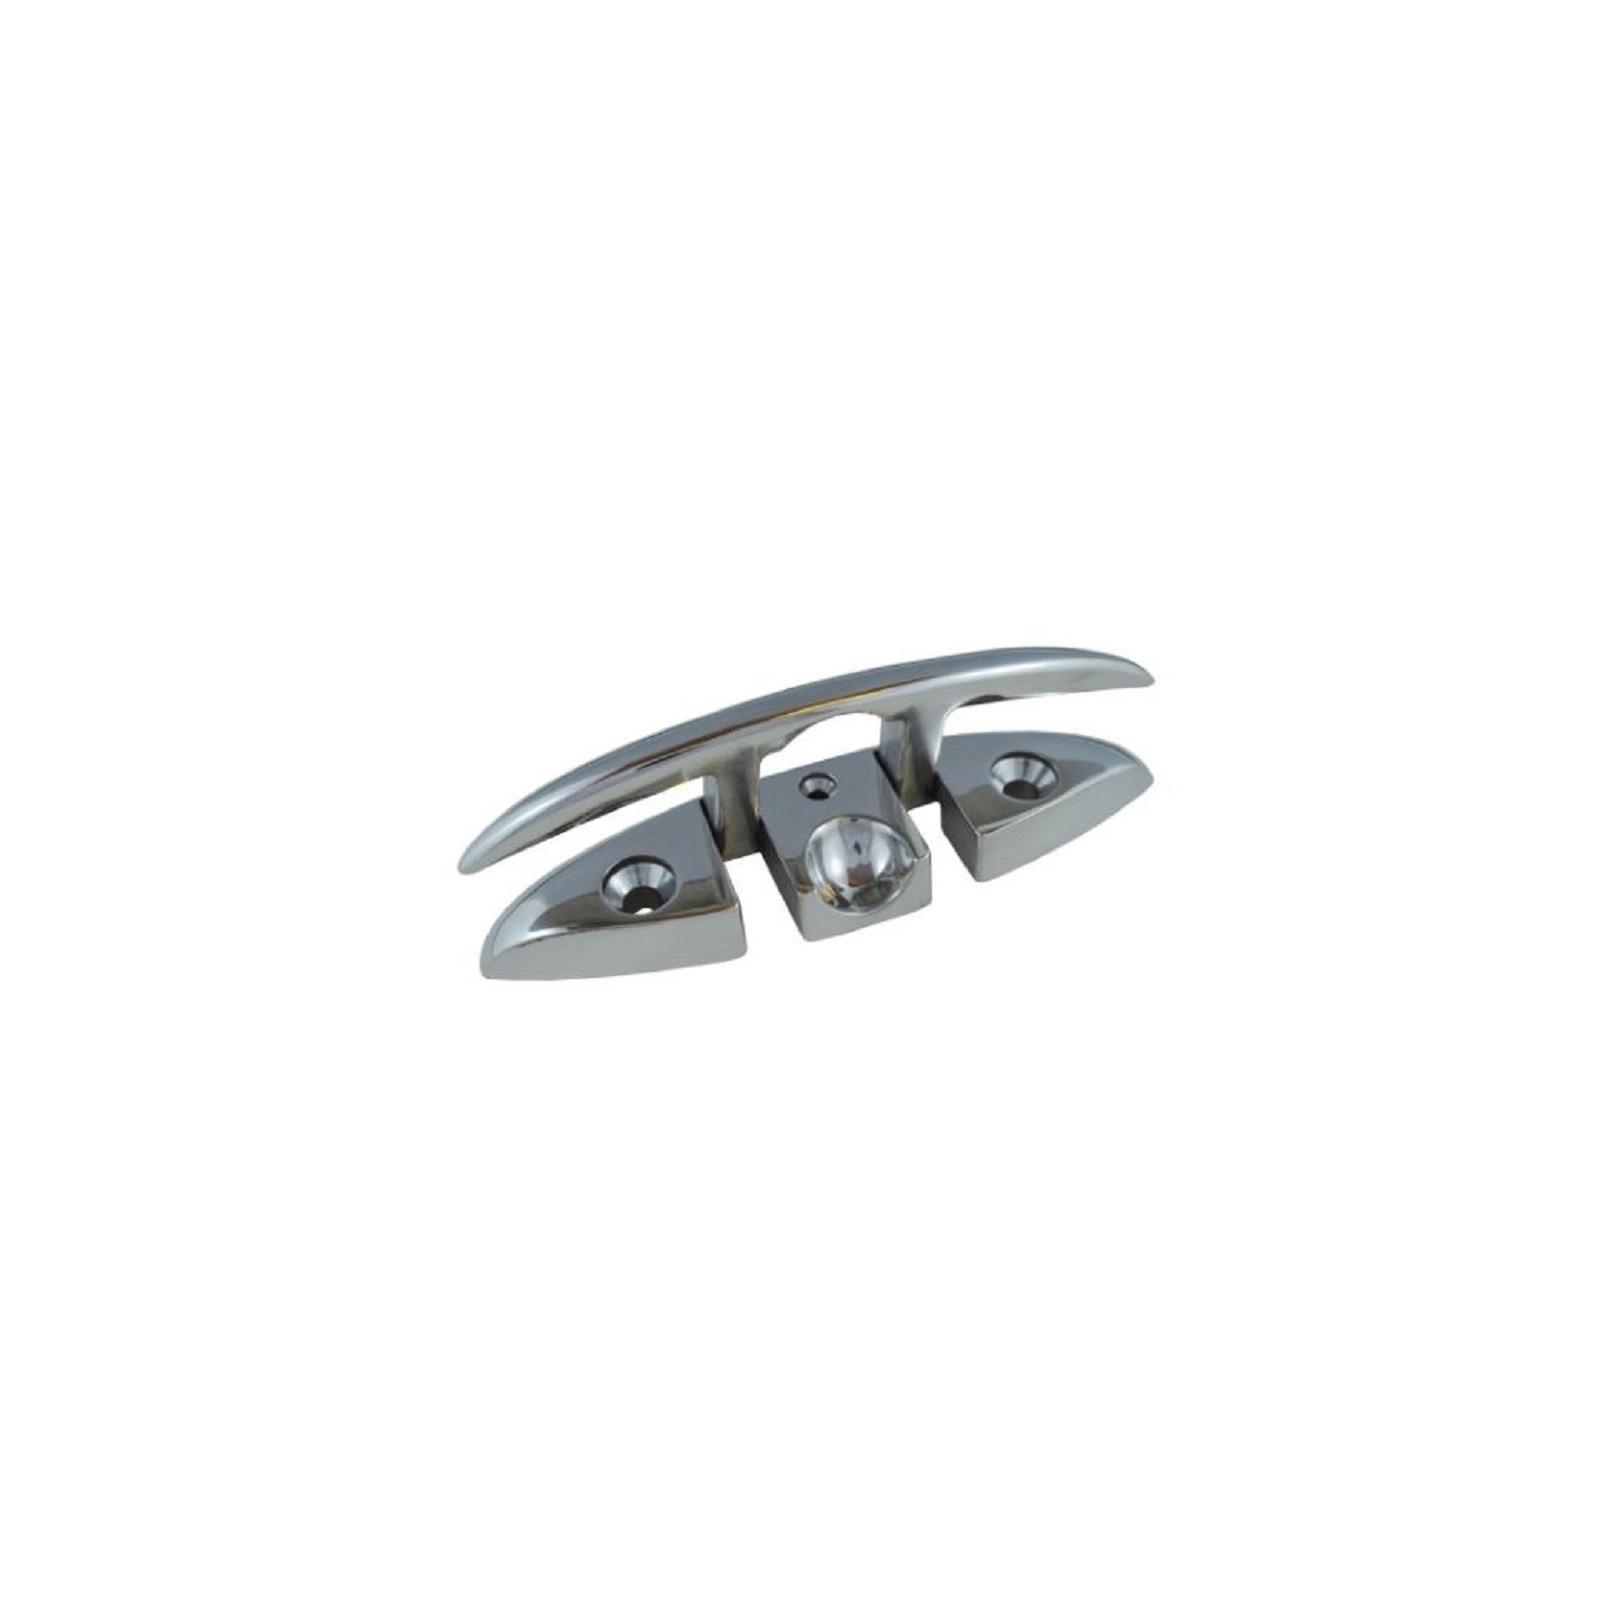 Boat Cleat - Folding 120mm Stainless Steel